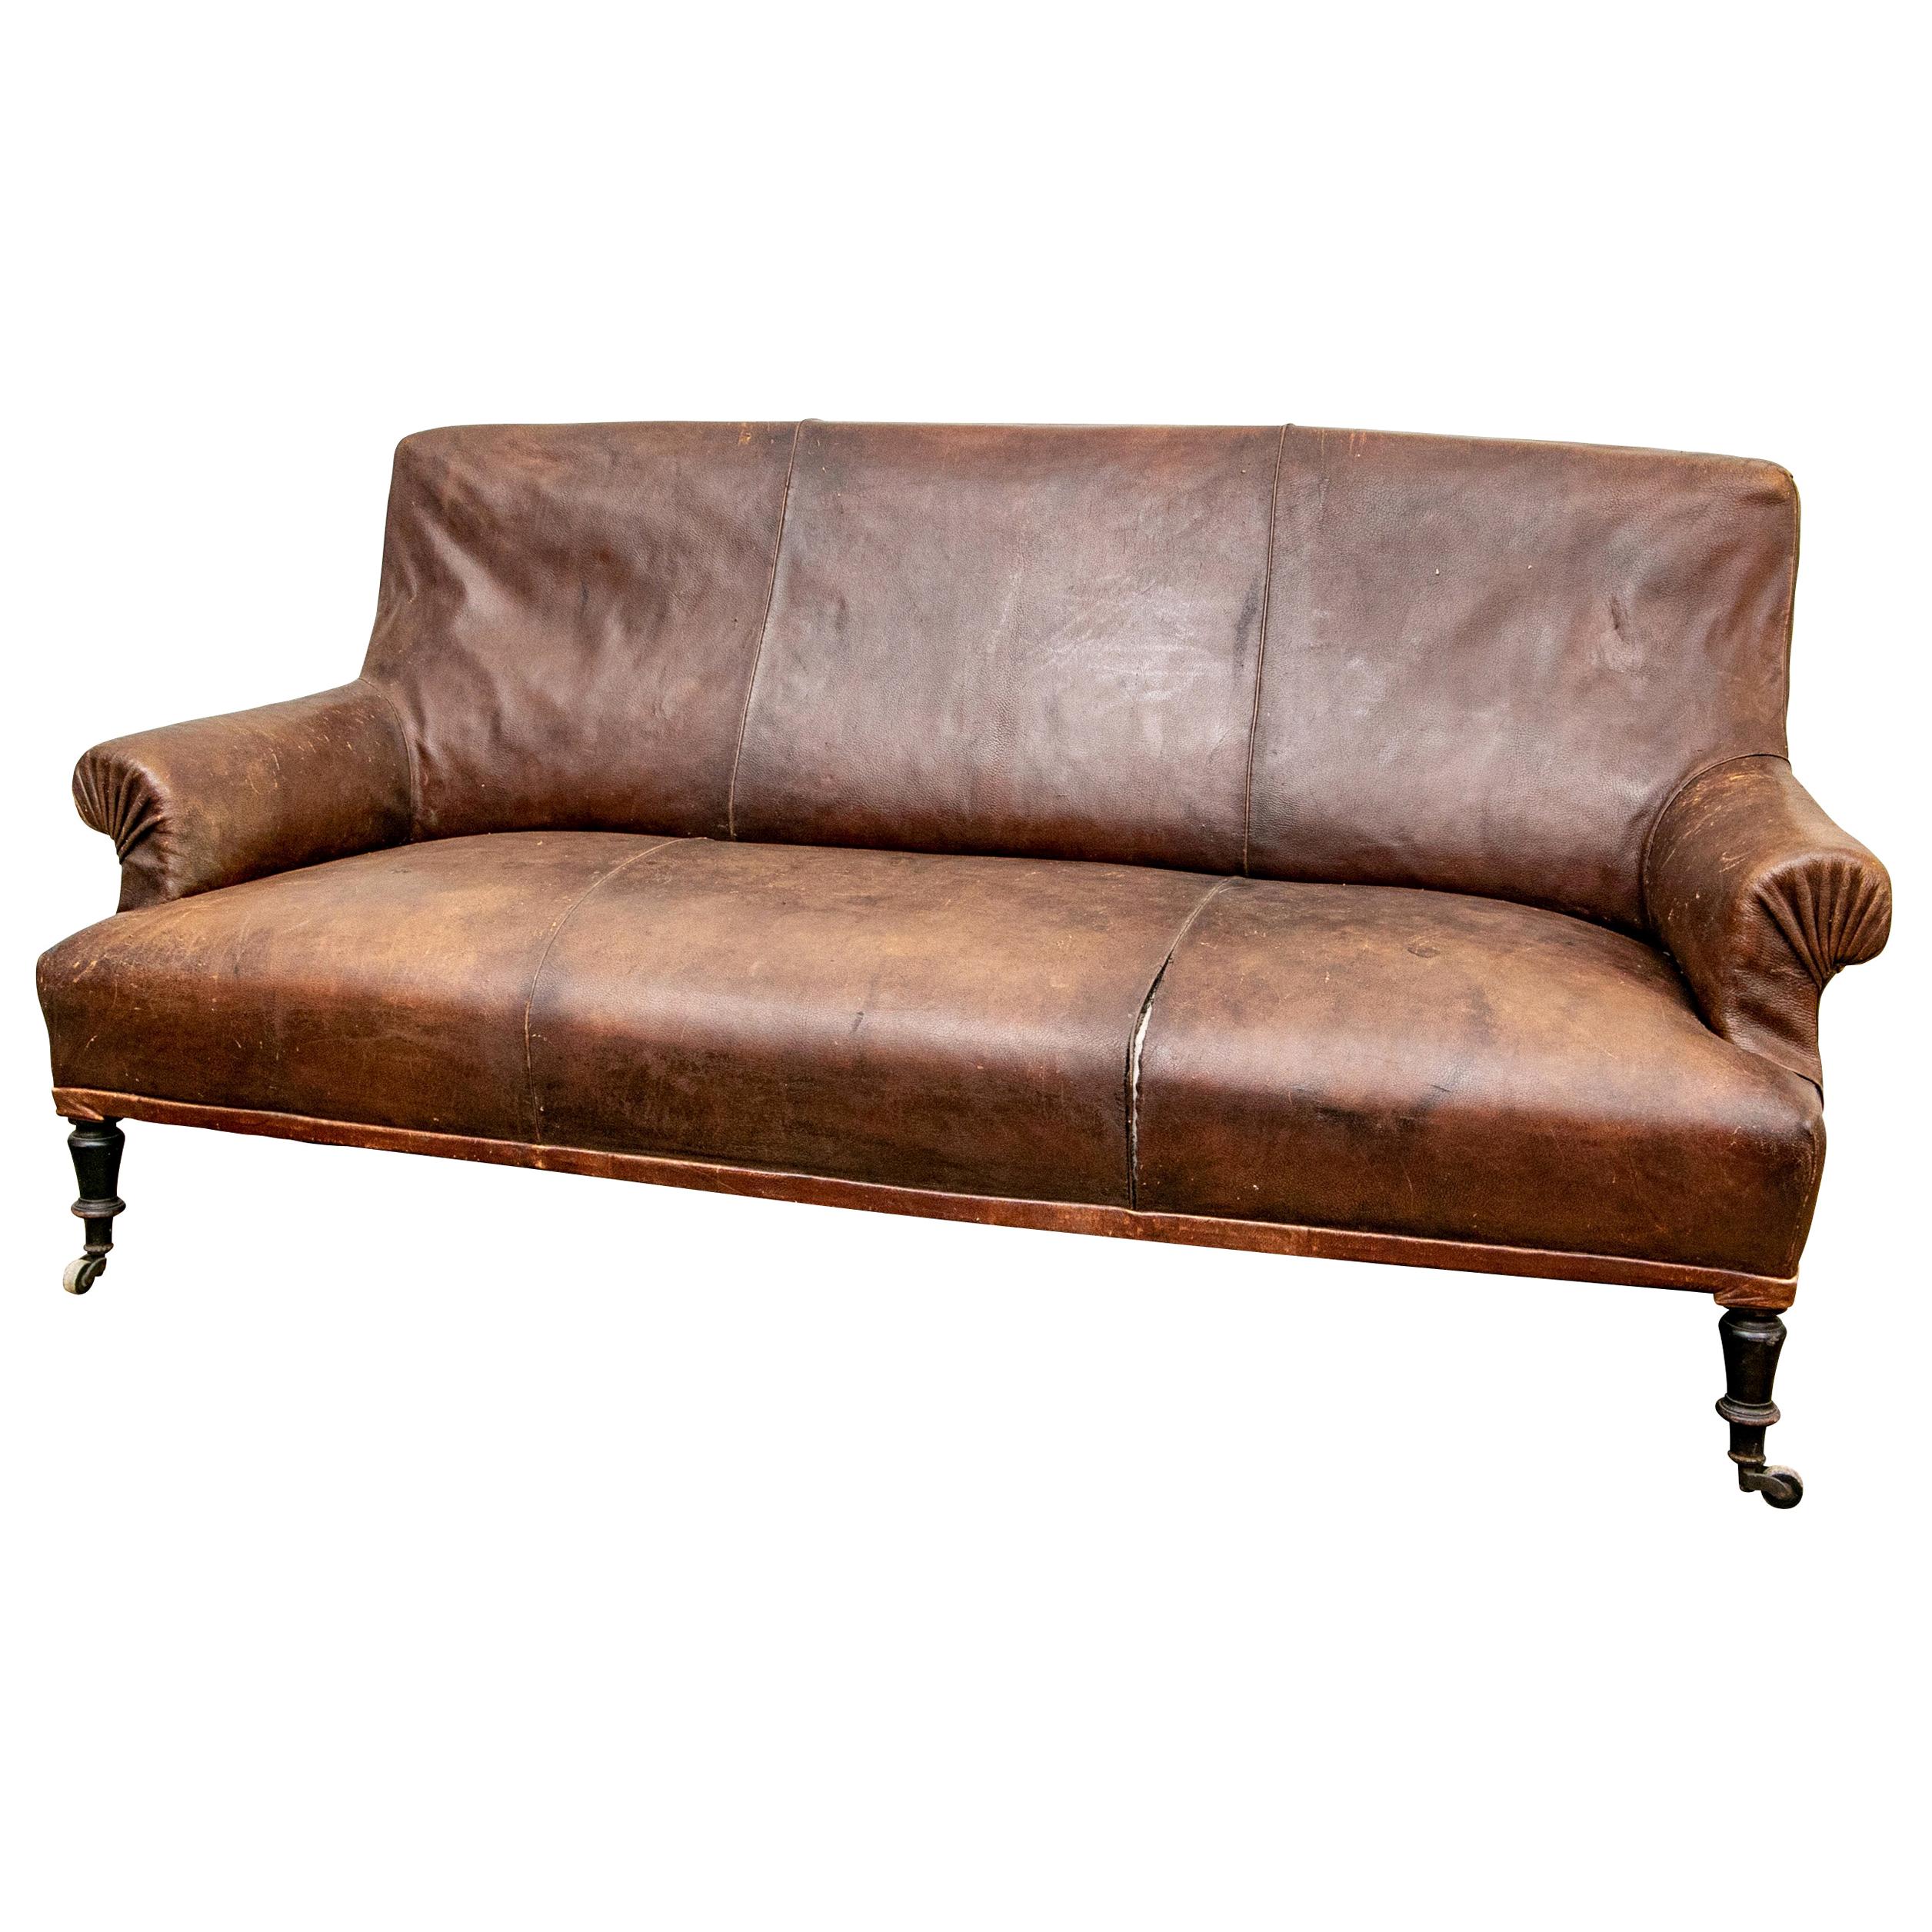 Antique French Leather Sofa